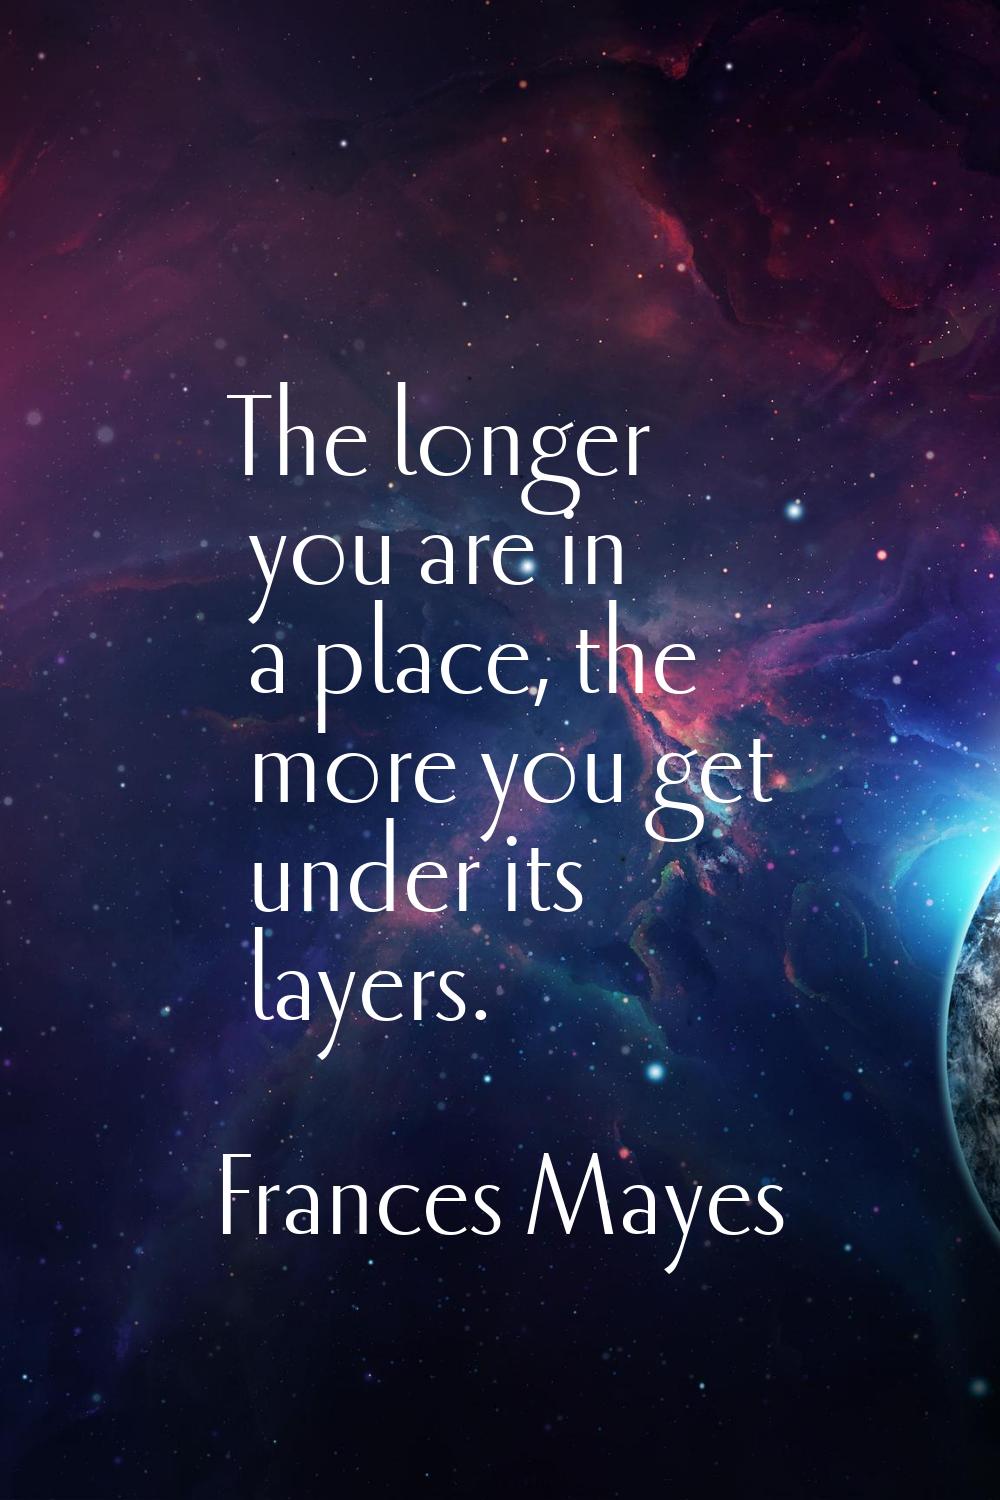 The longer you are in a place, the more you get under its layers.